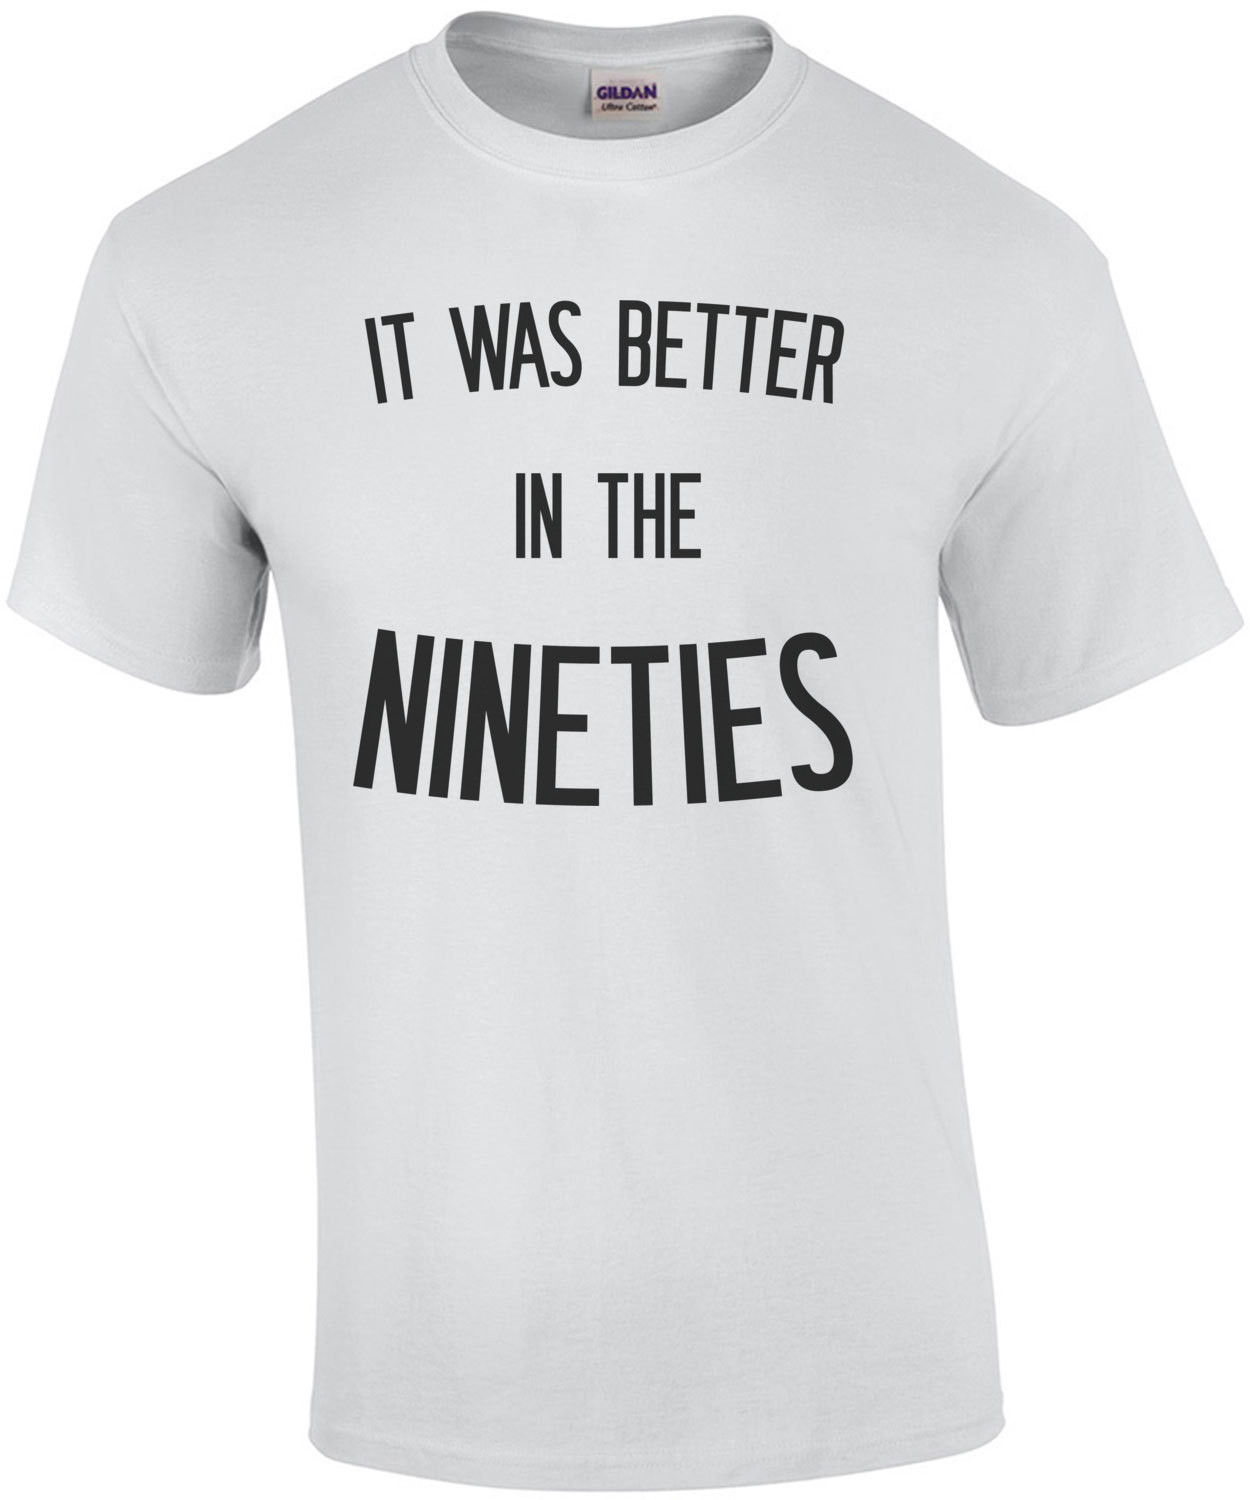 It was better in the nineties - 90's t-shirt